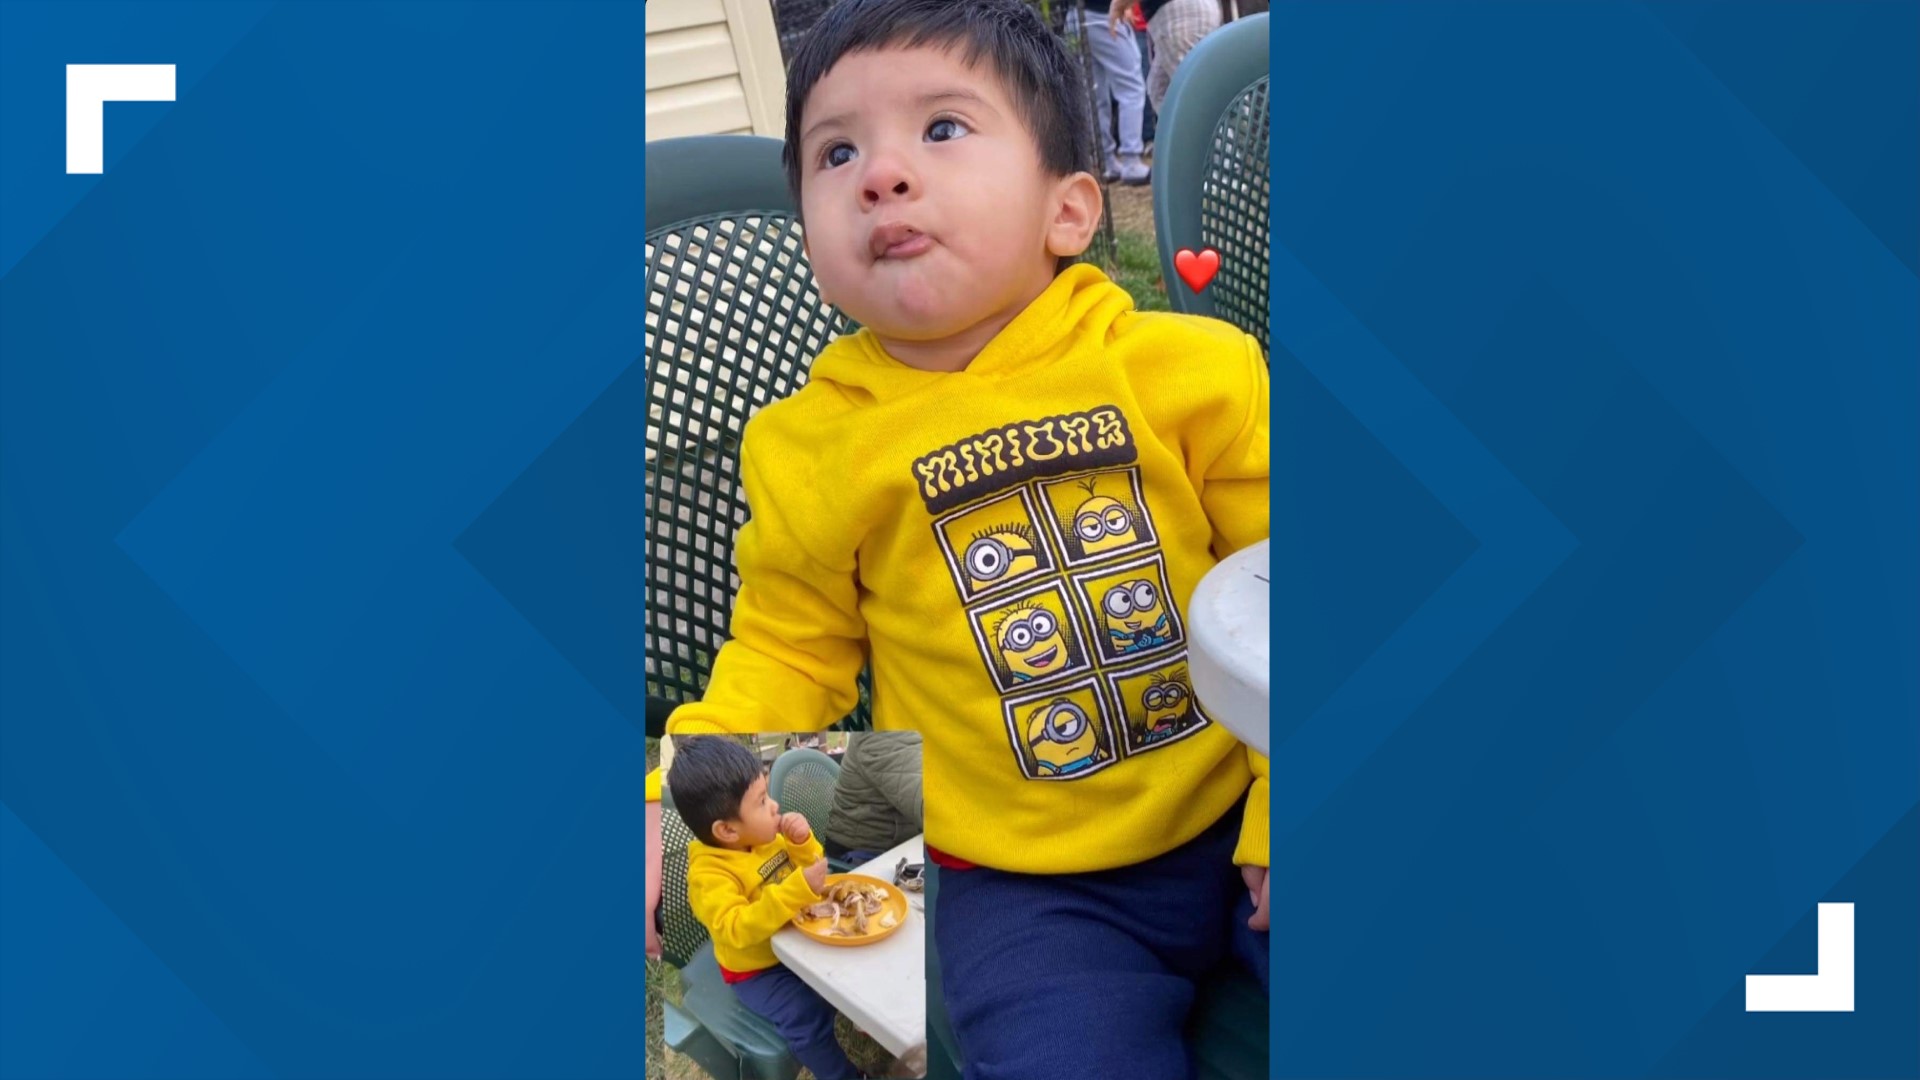 Police identified the two year-old boy shot and killed in Langley Park as JEREMY POOU-CACERES.